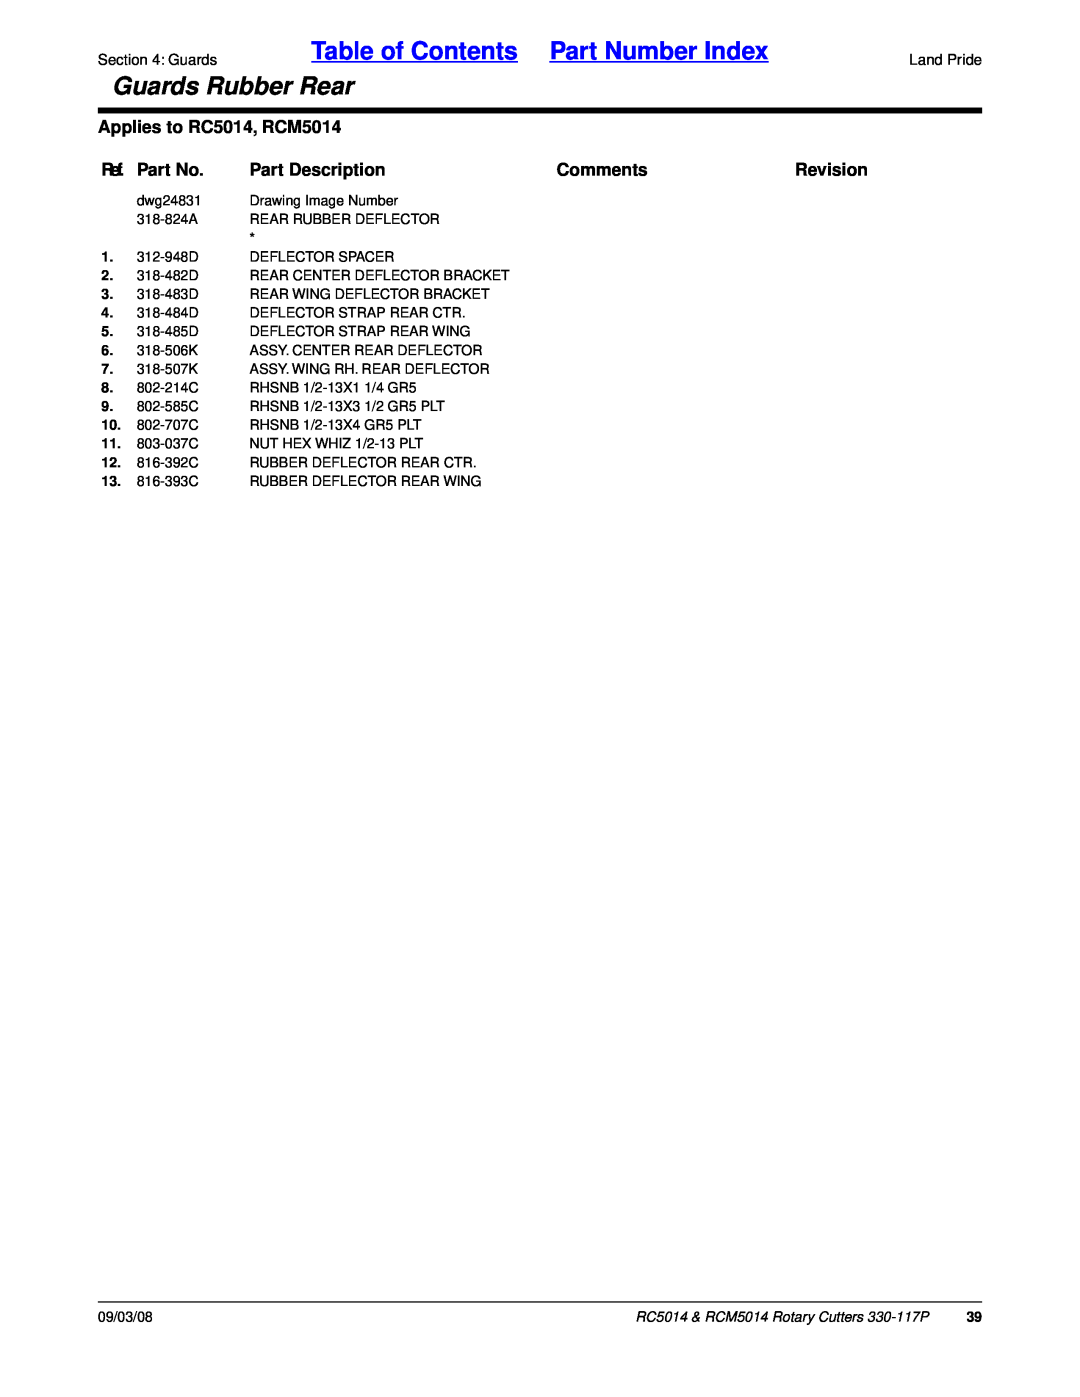 Land Pride Table of Contents Part Number Index, Guards Rubber Rear, Applies to RC5014, RCM5014, Ref. Part No, Comments 